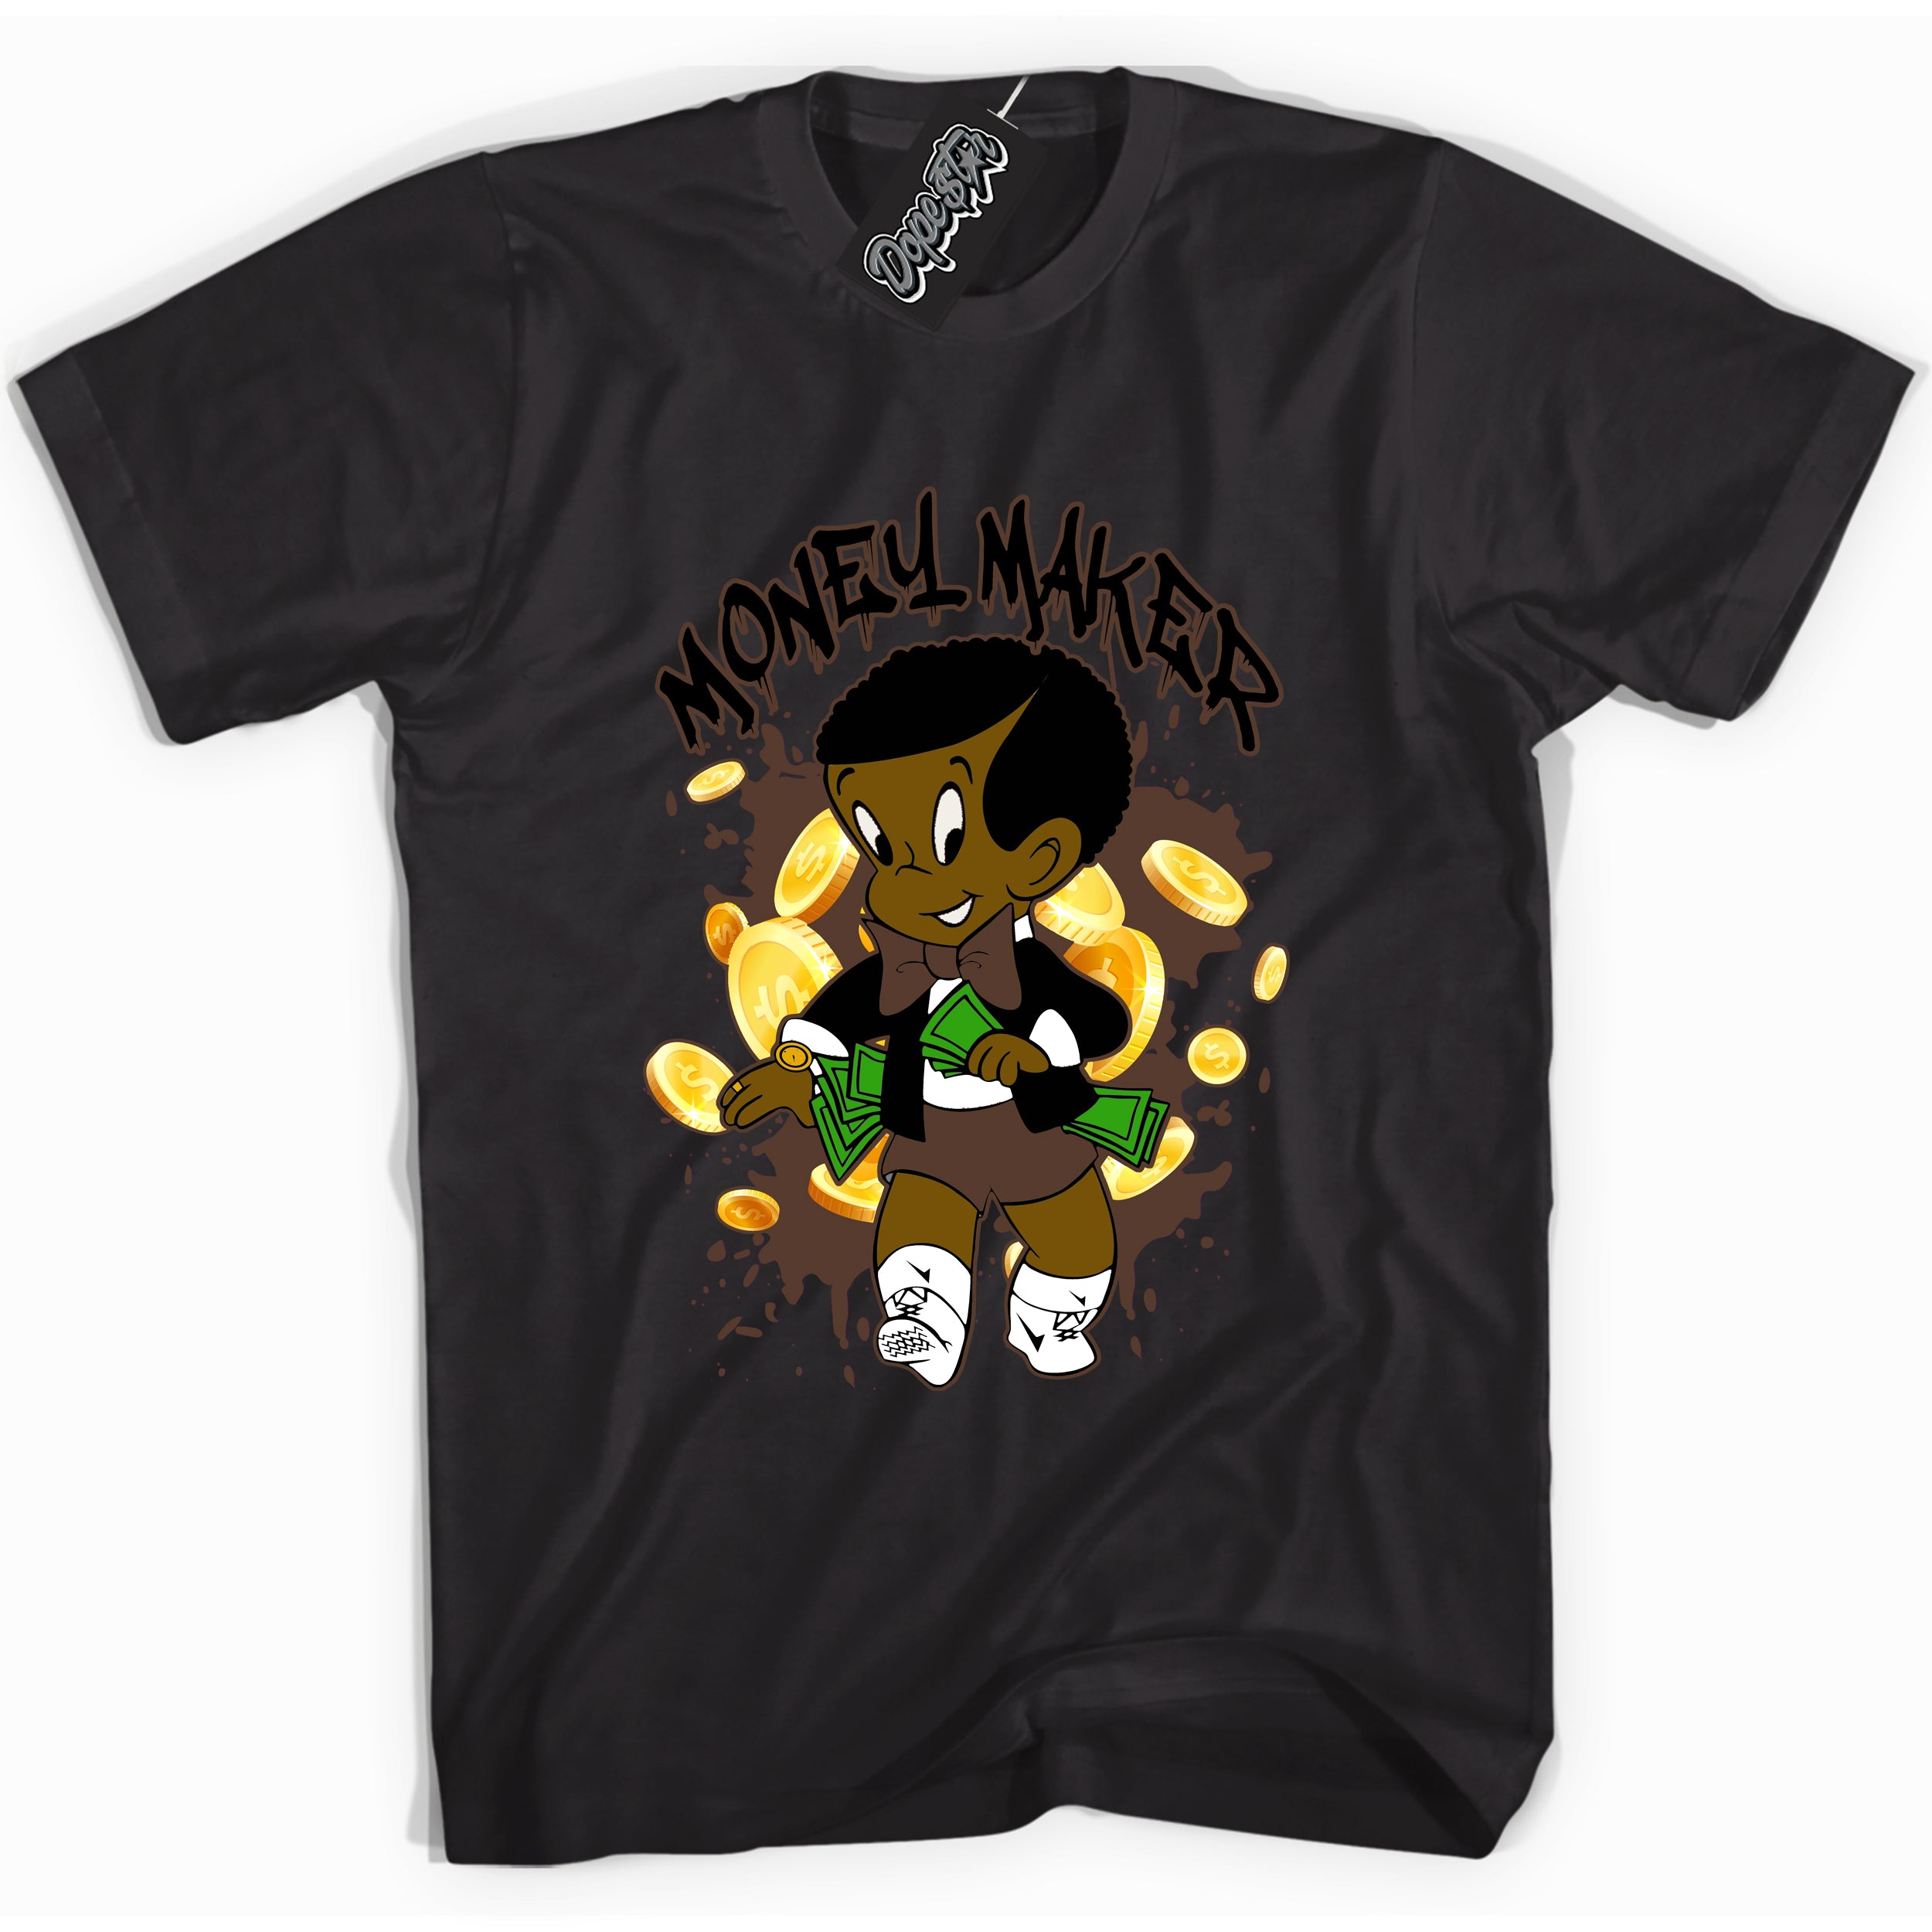 Cool Black graphic tee with “ Money Maker ” design, that perfectly matches Palomino 1s sneakers 